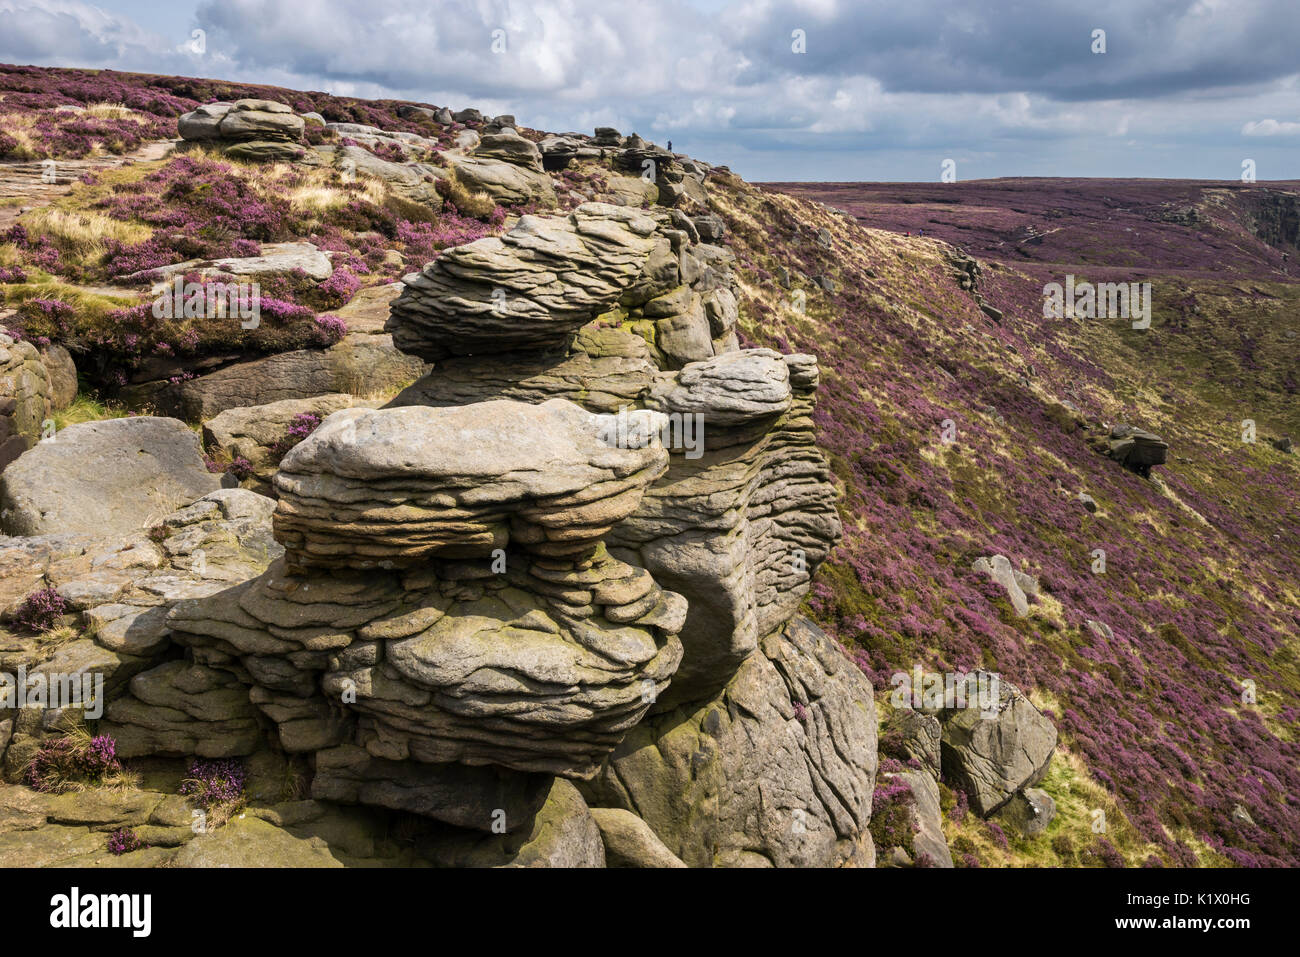 Rugged scenery at Upper Tor on the edge of Kinder Scout in the Peak District national park. Edale, Derbyshire, England. Stock Photo